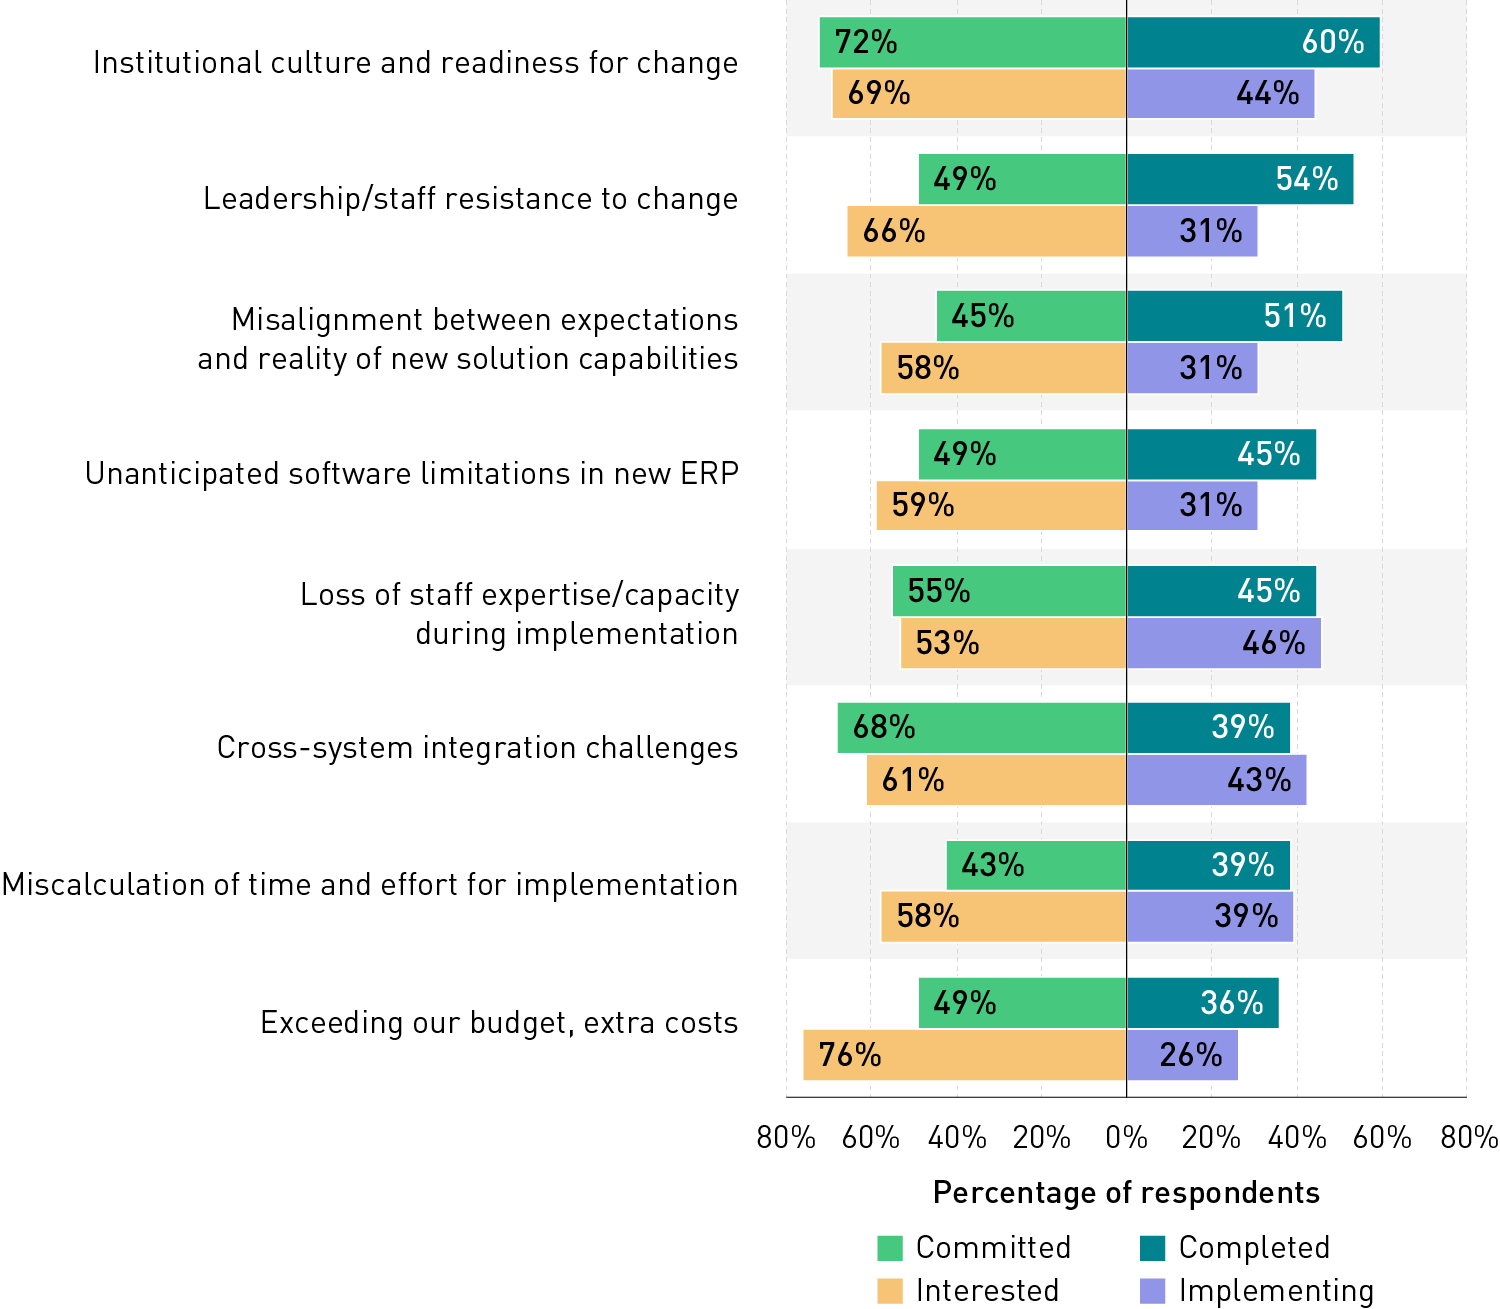 Bar chart showing the percentages of respondents in each group (committed, interested, completed, and implementing) who identified challenges they experienced or anticipate for their ERP implementations. At the top is institutional culture and readiness for change (identified by 72% of committed, 69% of interested, 60% of completed, and 44% of implementing). The other items on the list: leadership/staff resistance to change (49%, 66%, 54%, and 31%); misalignment between expectations and reality of new solution capabilities (45%, 58%, 51%, and 31%); unanticipated software limitations in new ERP (49%, 59%, 45%, and 31%); loss of staff expertise/capacity during implementation (55%, 53%, 45%, and 46%); cross-system integration challenges (68%, 61%, 39%, and 43%); miscalculation of time and effort for implementation (43%, 58%, 39%, and 39%); and exceeding budget, extra costs (49%, 76%, 36%, and 26%). 